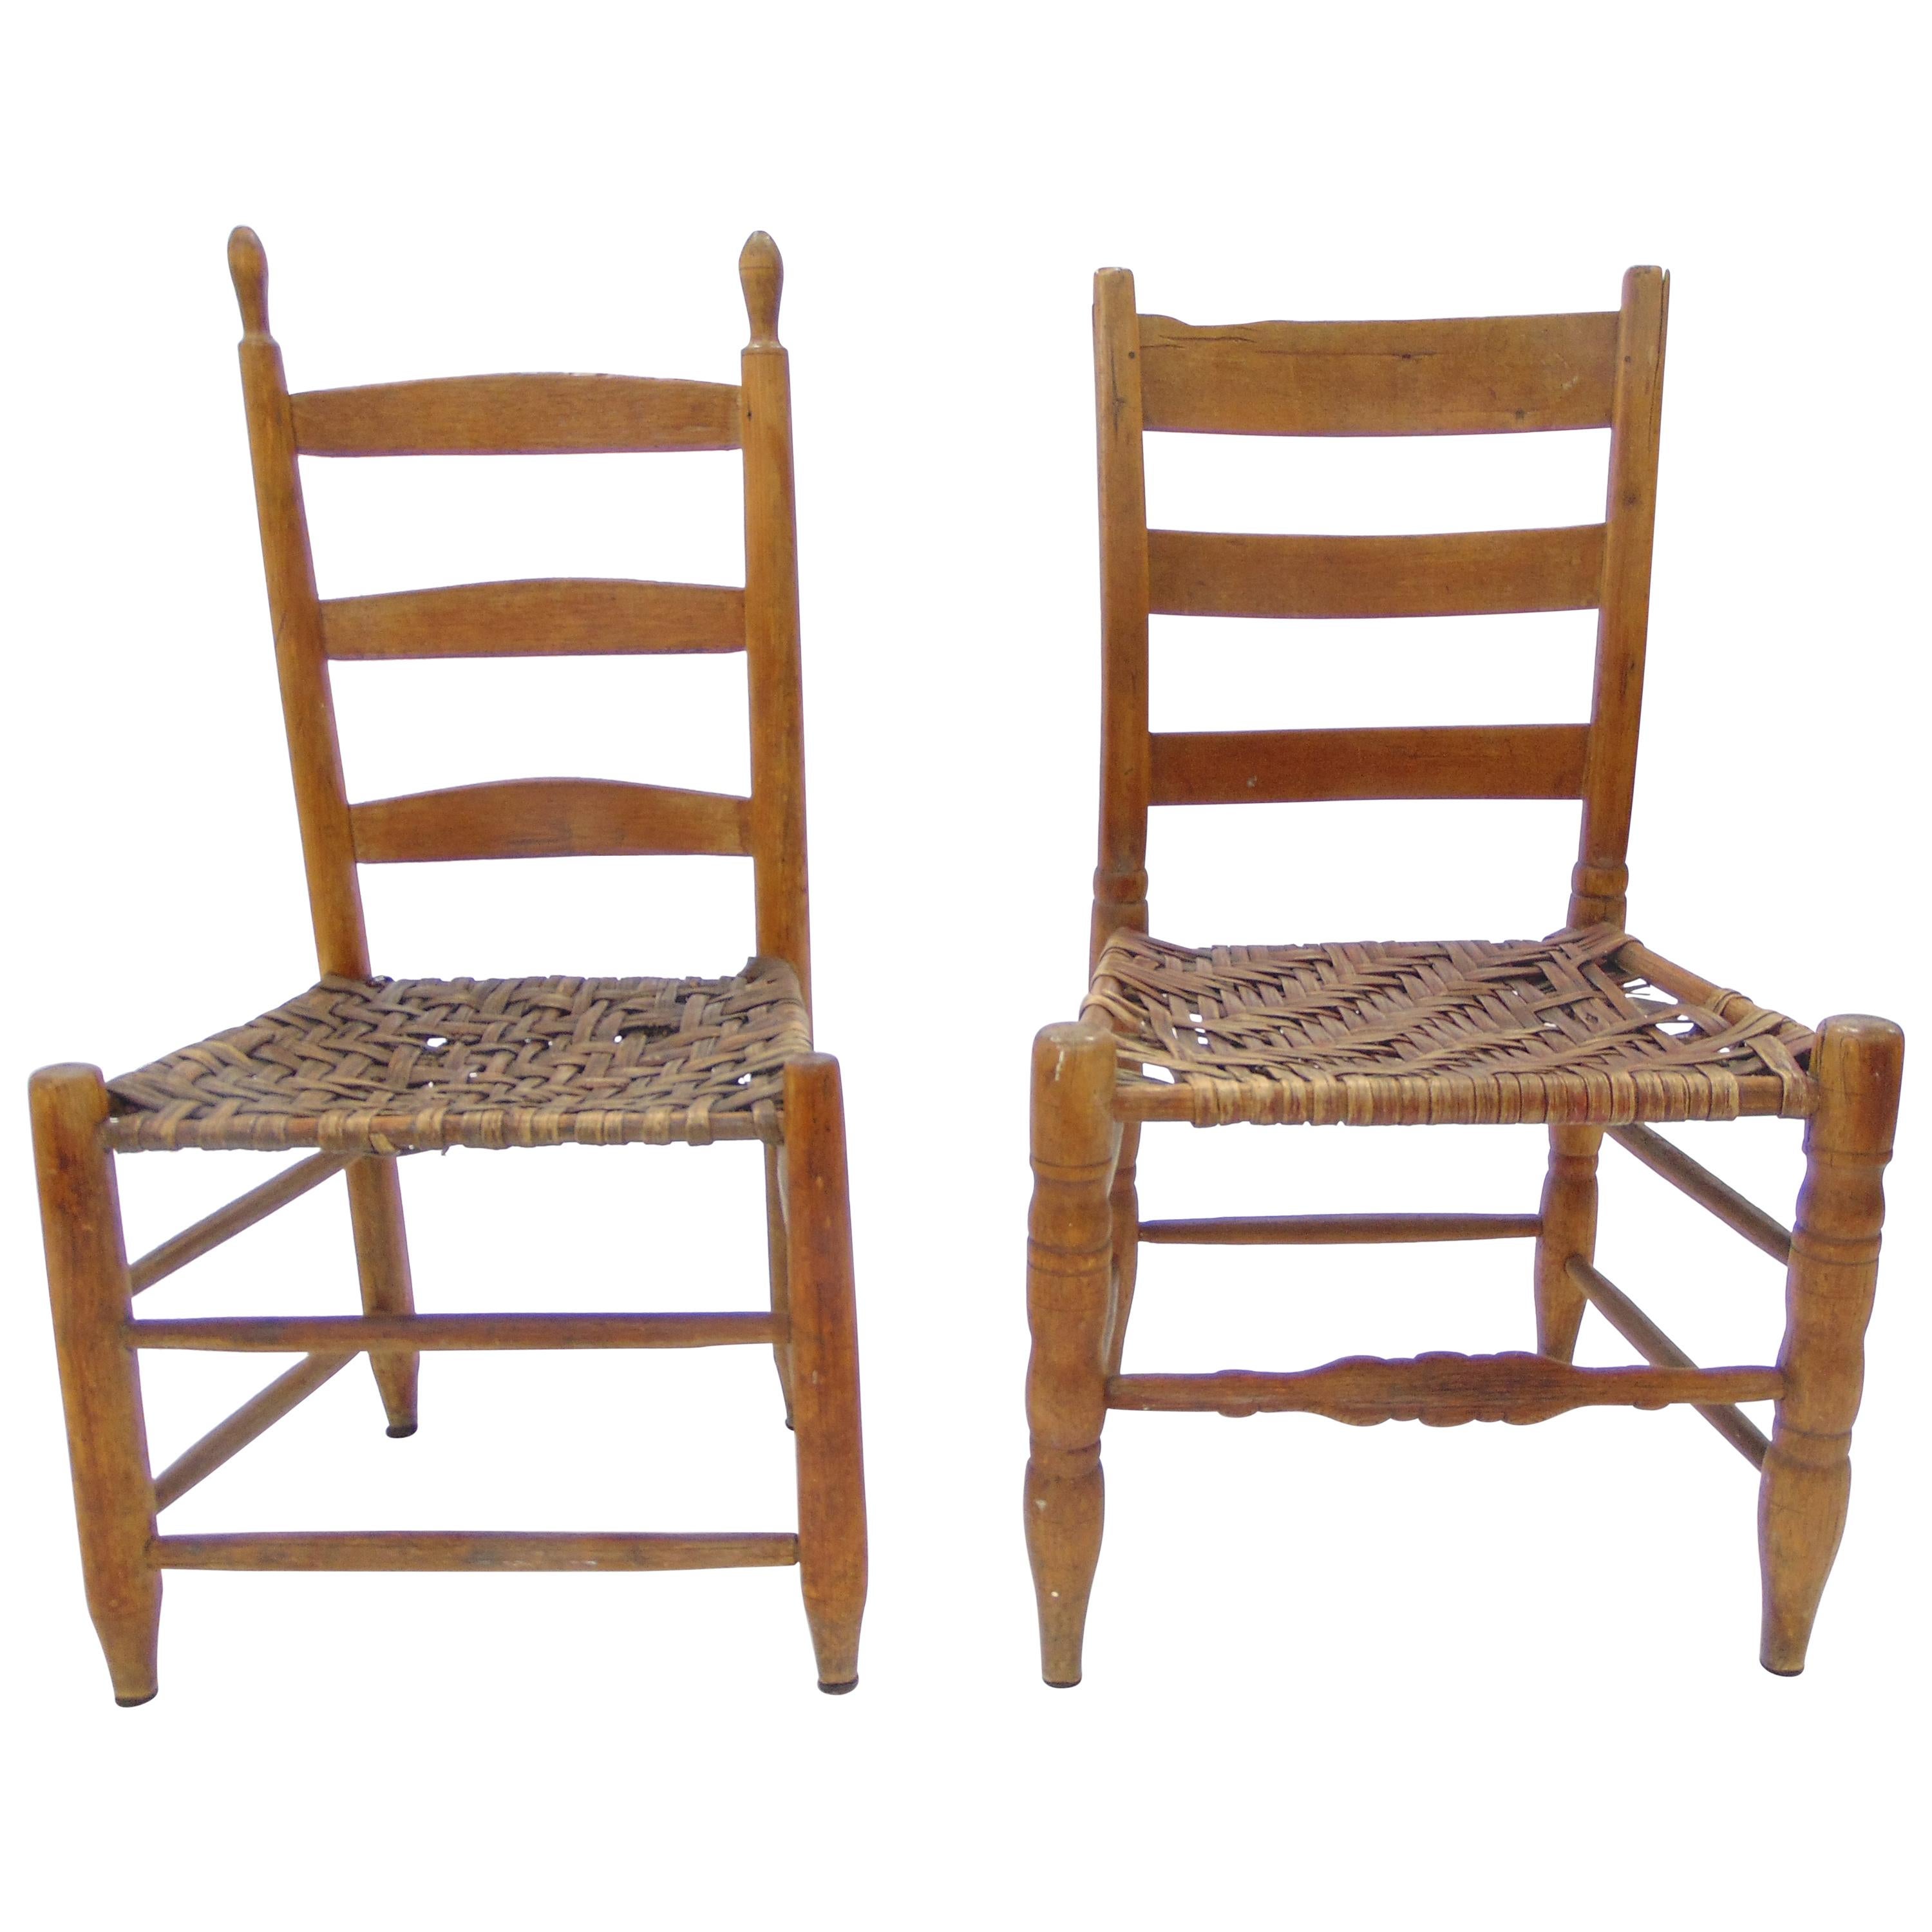 Pair of Antique Primitive Ladder Back and Splint Seats Early 19th Century For Sale